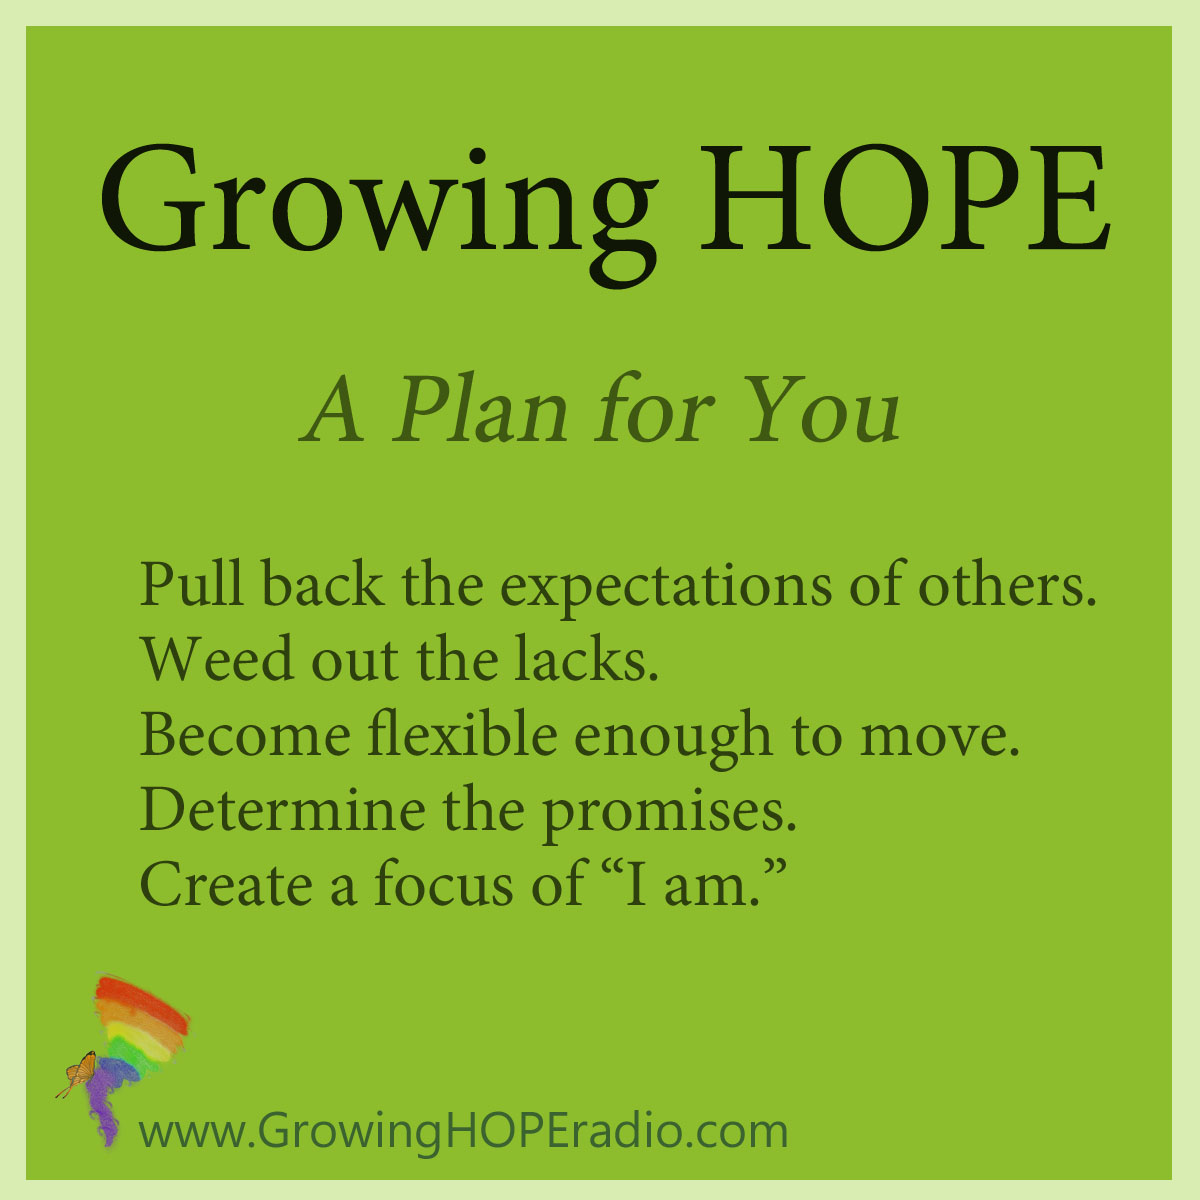 #GrowingHOPE Daily - 5 points - plan for you